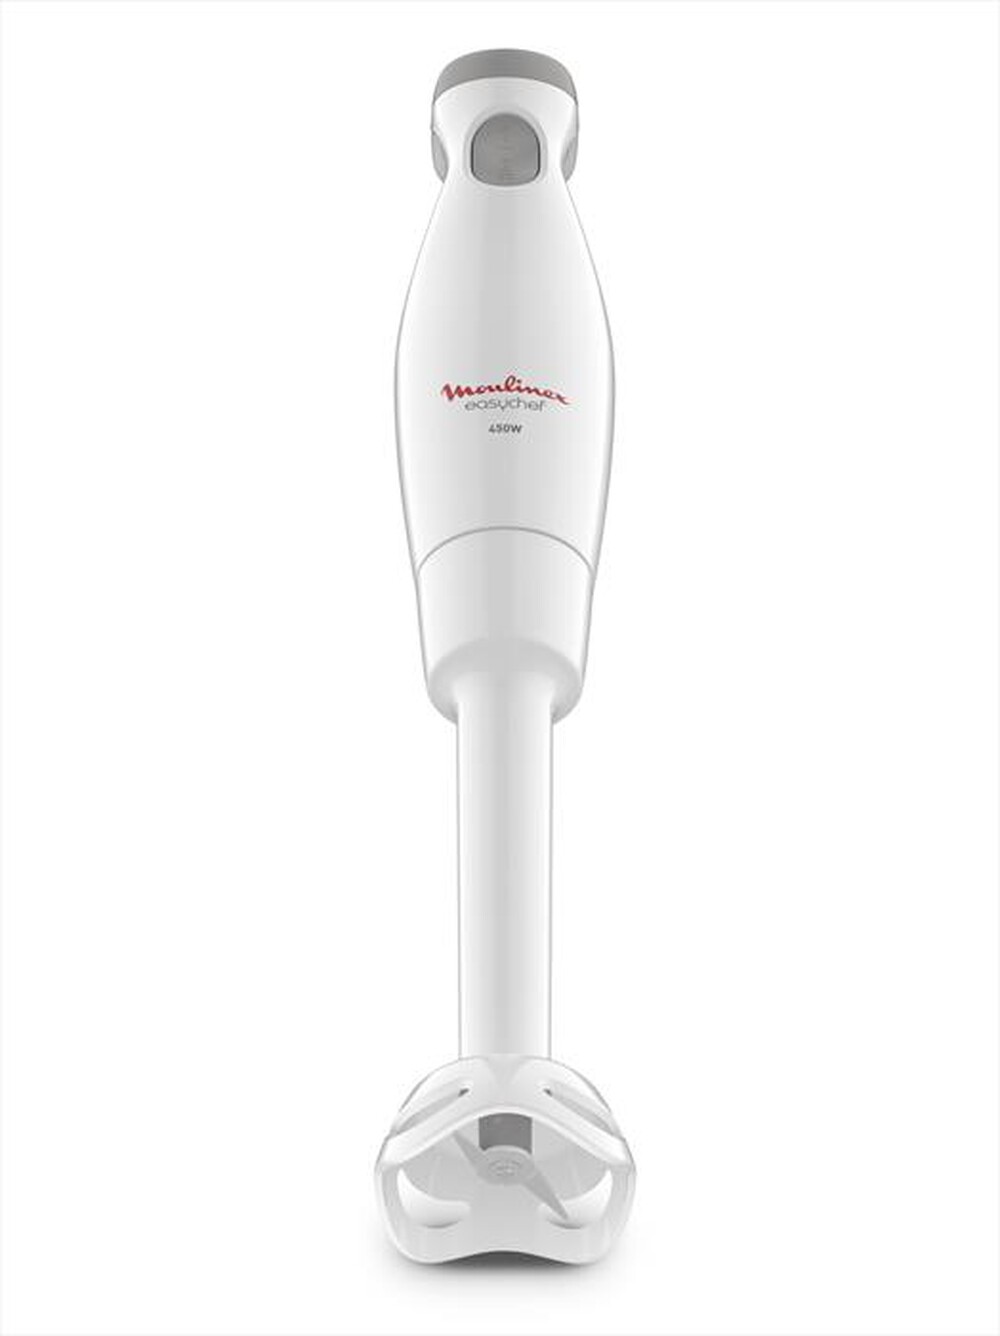 "MOULINEX - DD45A1 Easychef, Mixer ad Immersione-White/Pepper"